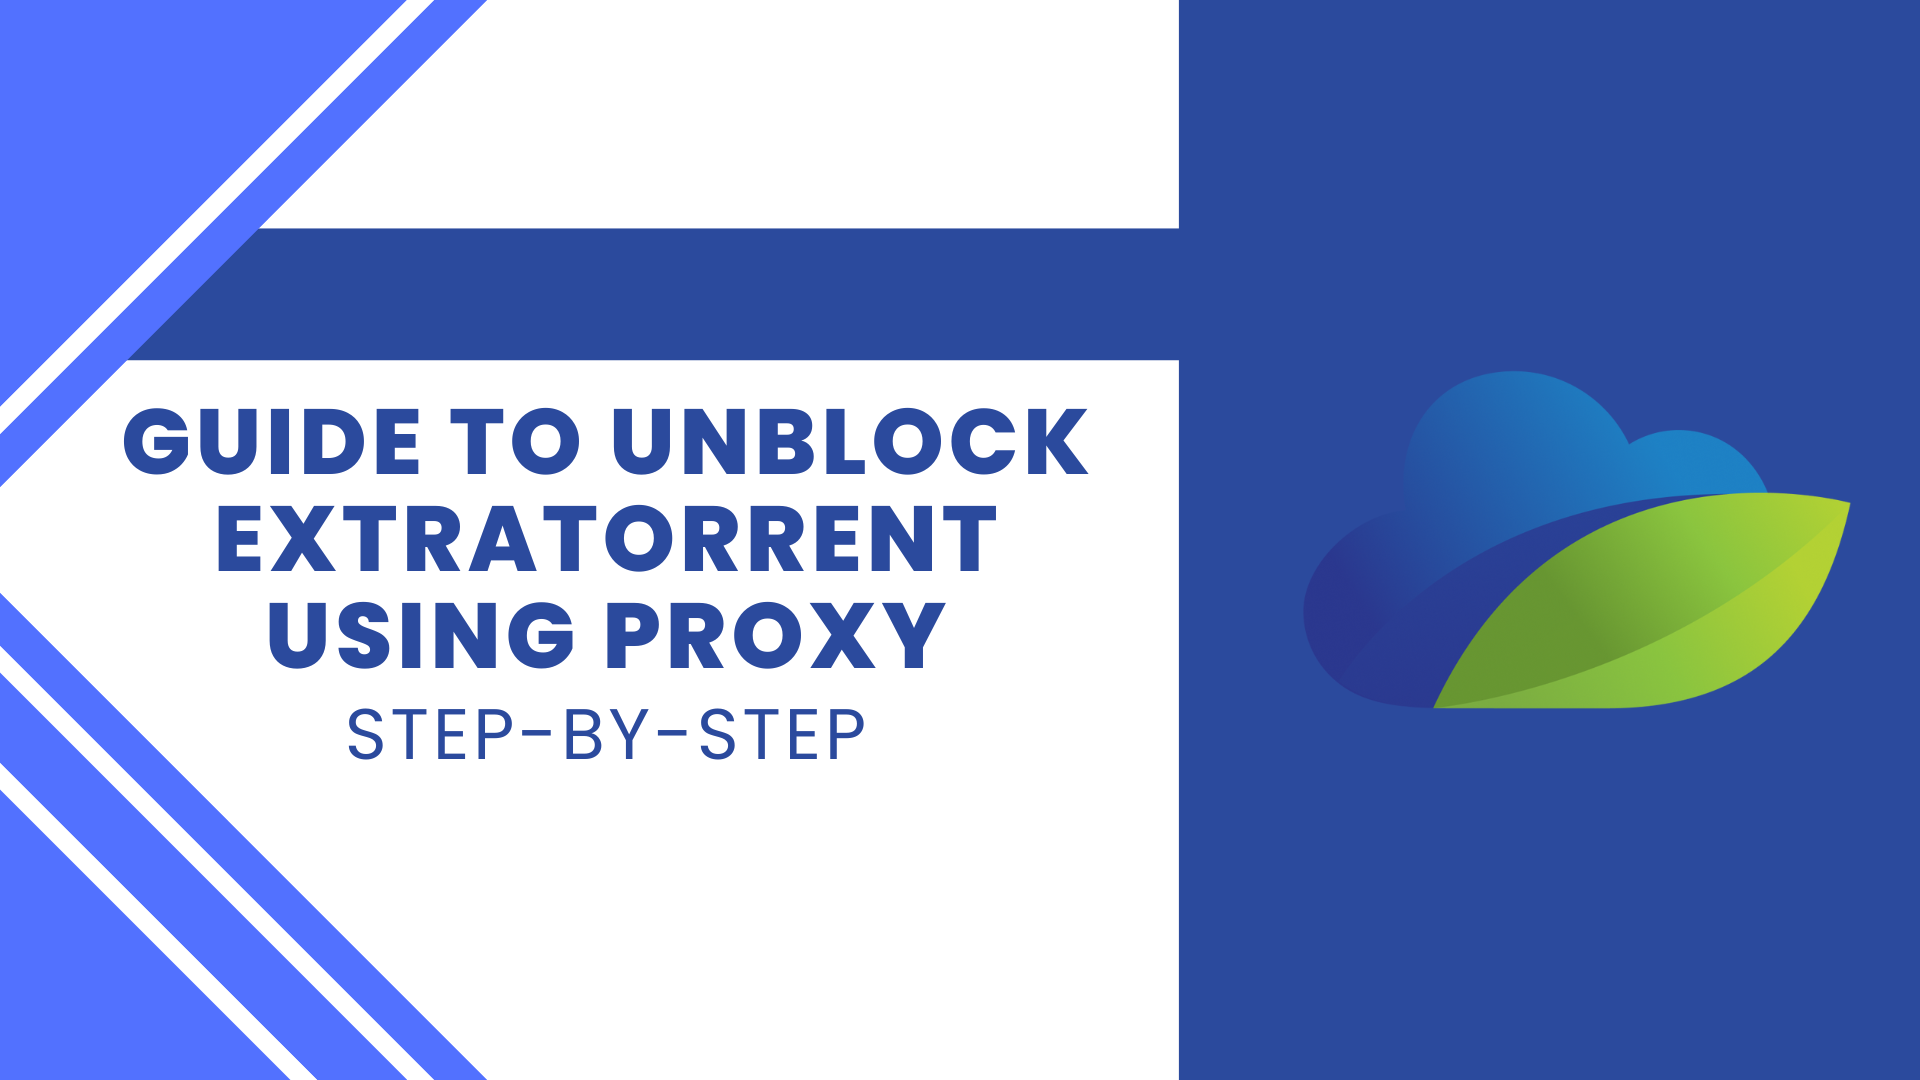 Guide to unblock ExtraTorrent using proxy